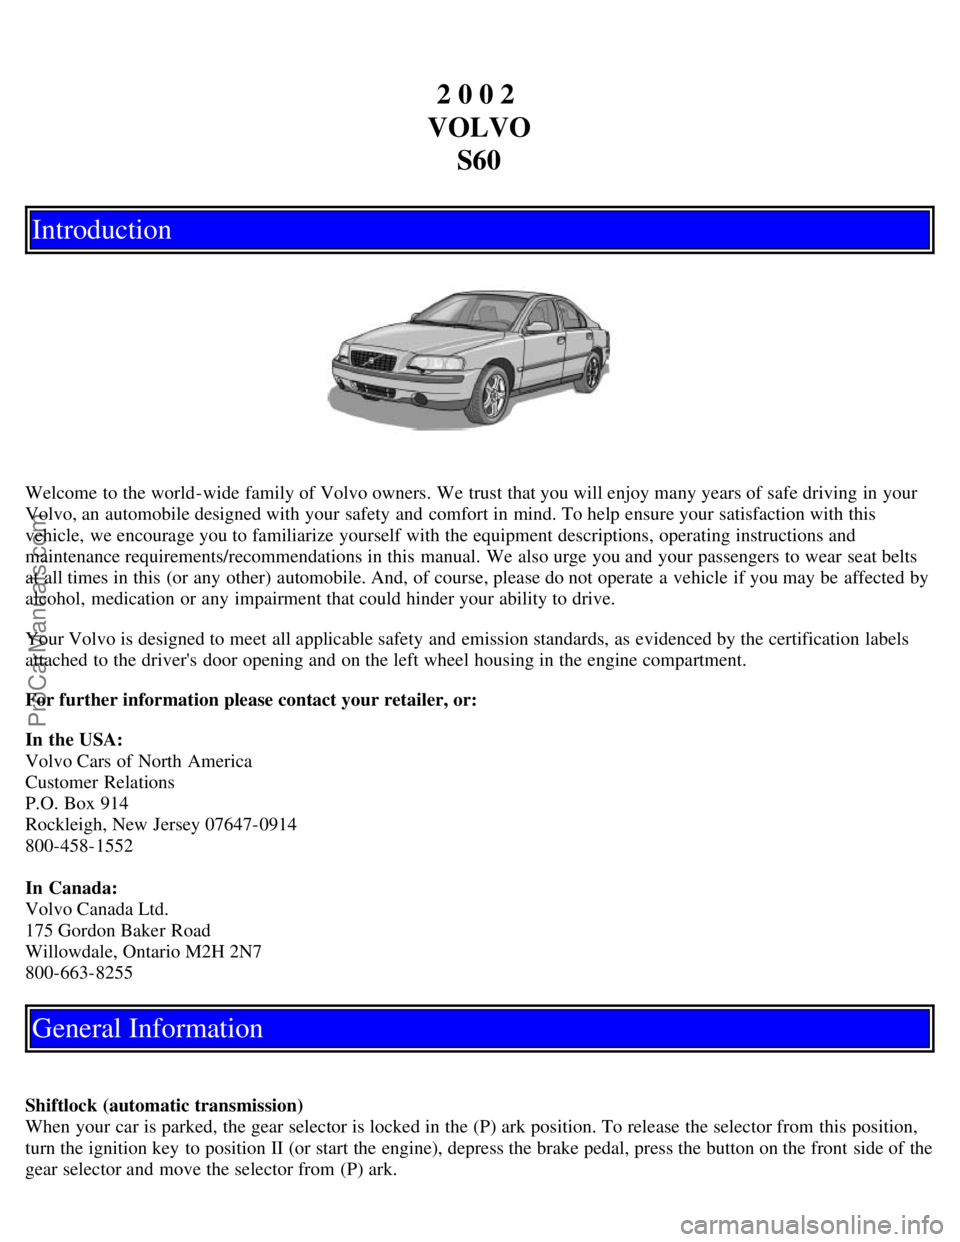 VOLVO S60 2002  Owners Manual 2 0 0 2 
VOLVO S60
Introduction
Welcome to the world-wide  family of Volvo owners. We trust that you will enjoy many years of safe driving in your
Volvo, an  automobile designed with your safety and  